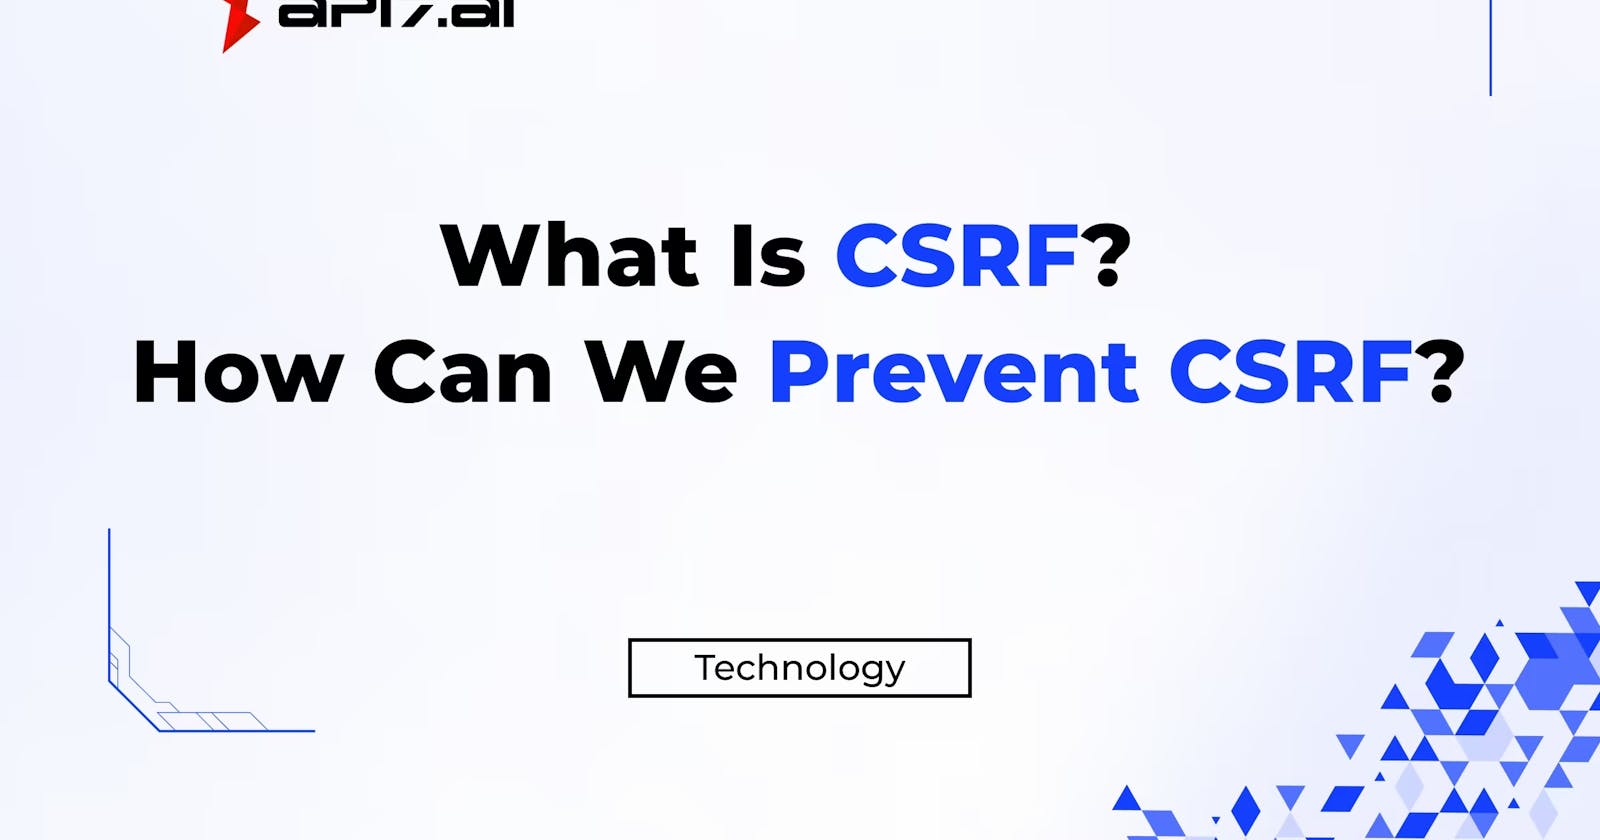 What Is CSRF? How Can We Prevent CSRF?